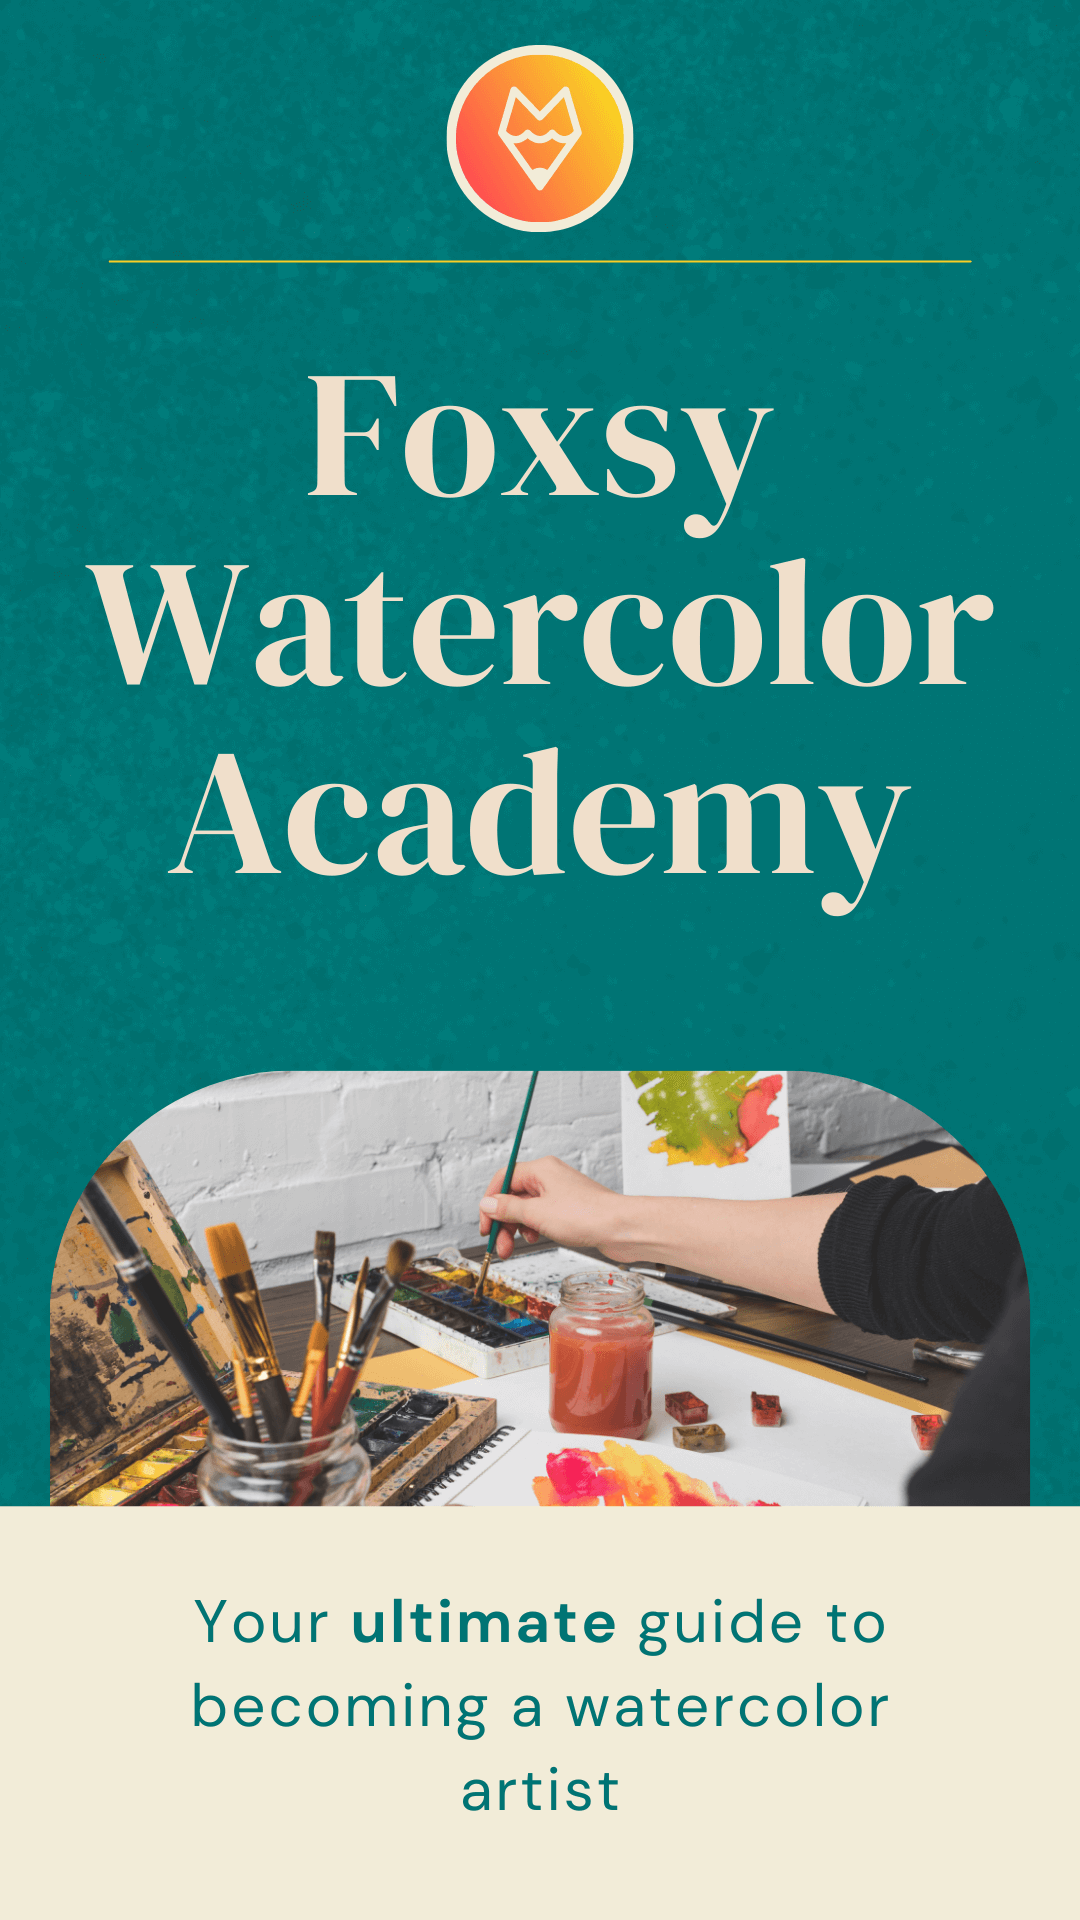 Check out the Foxsy Watercolor Academy to learn how you can improve your watercolour paintings and become the artist of your dreams!